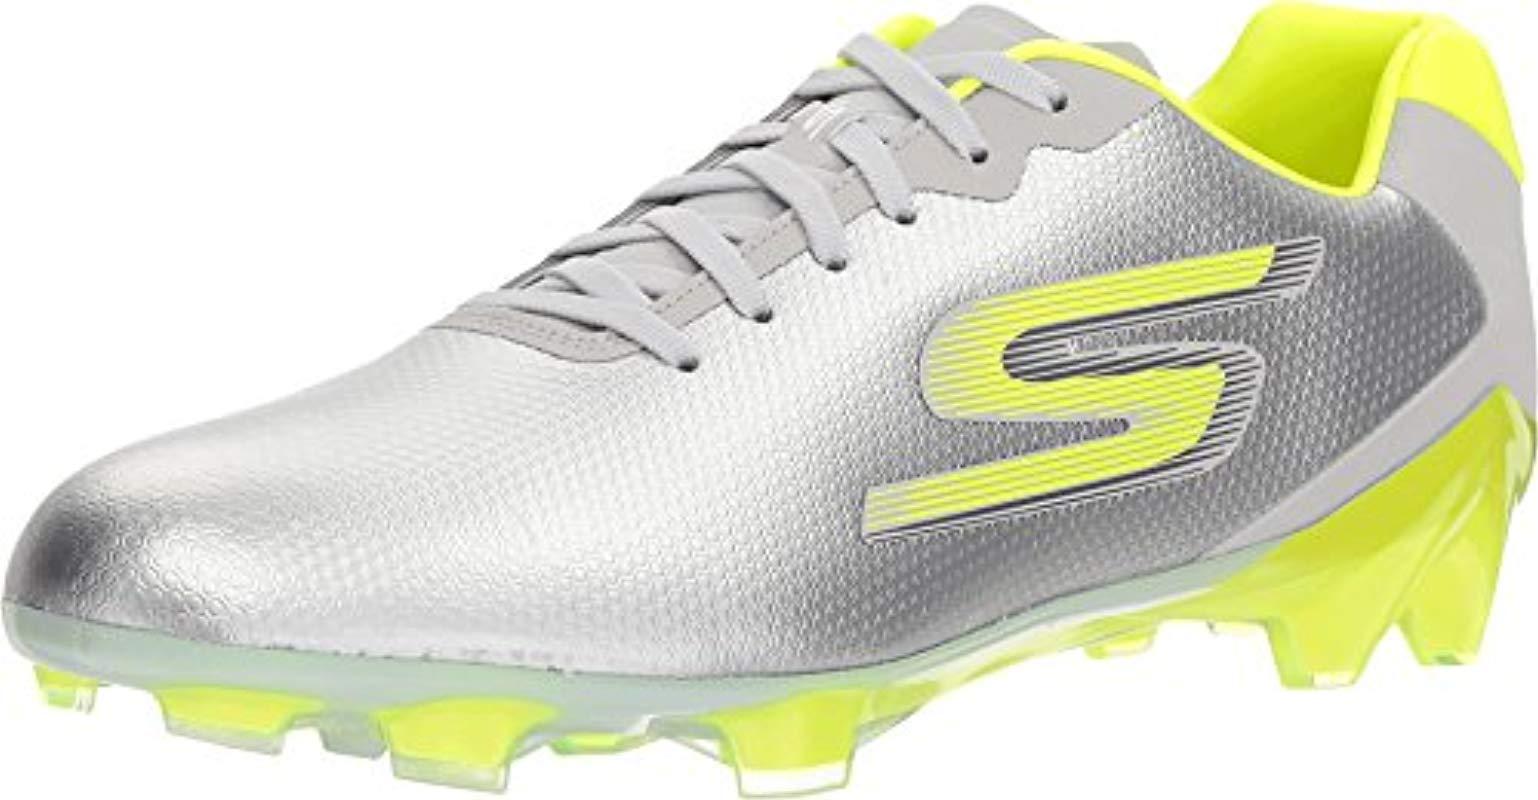 Skechers Synthetic Performance Go Galaxy Fg Soccer Cleat Shoe for Men - Lyst